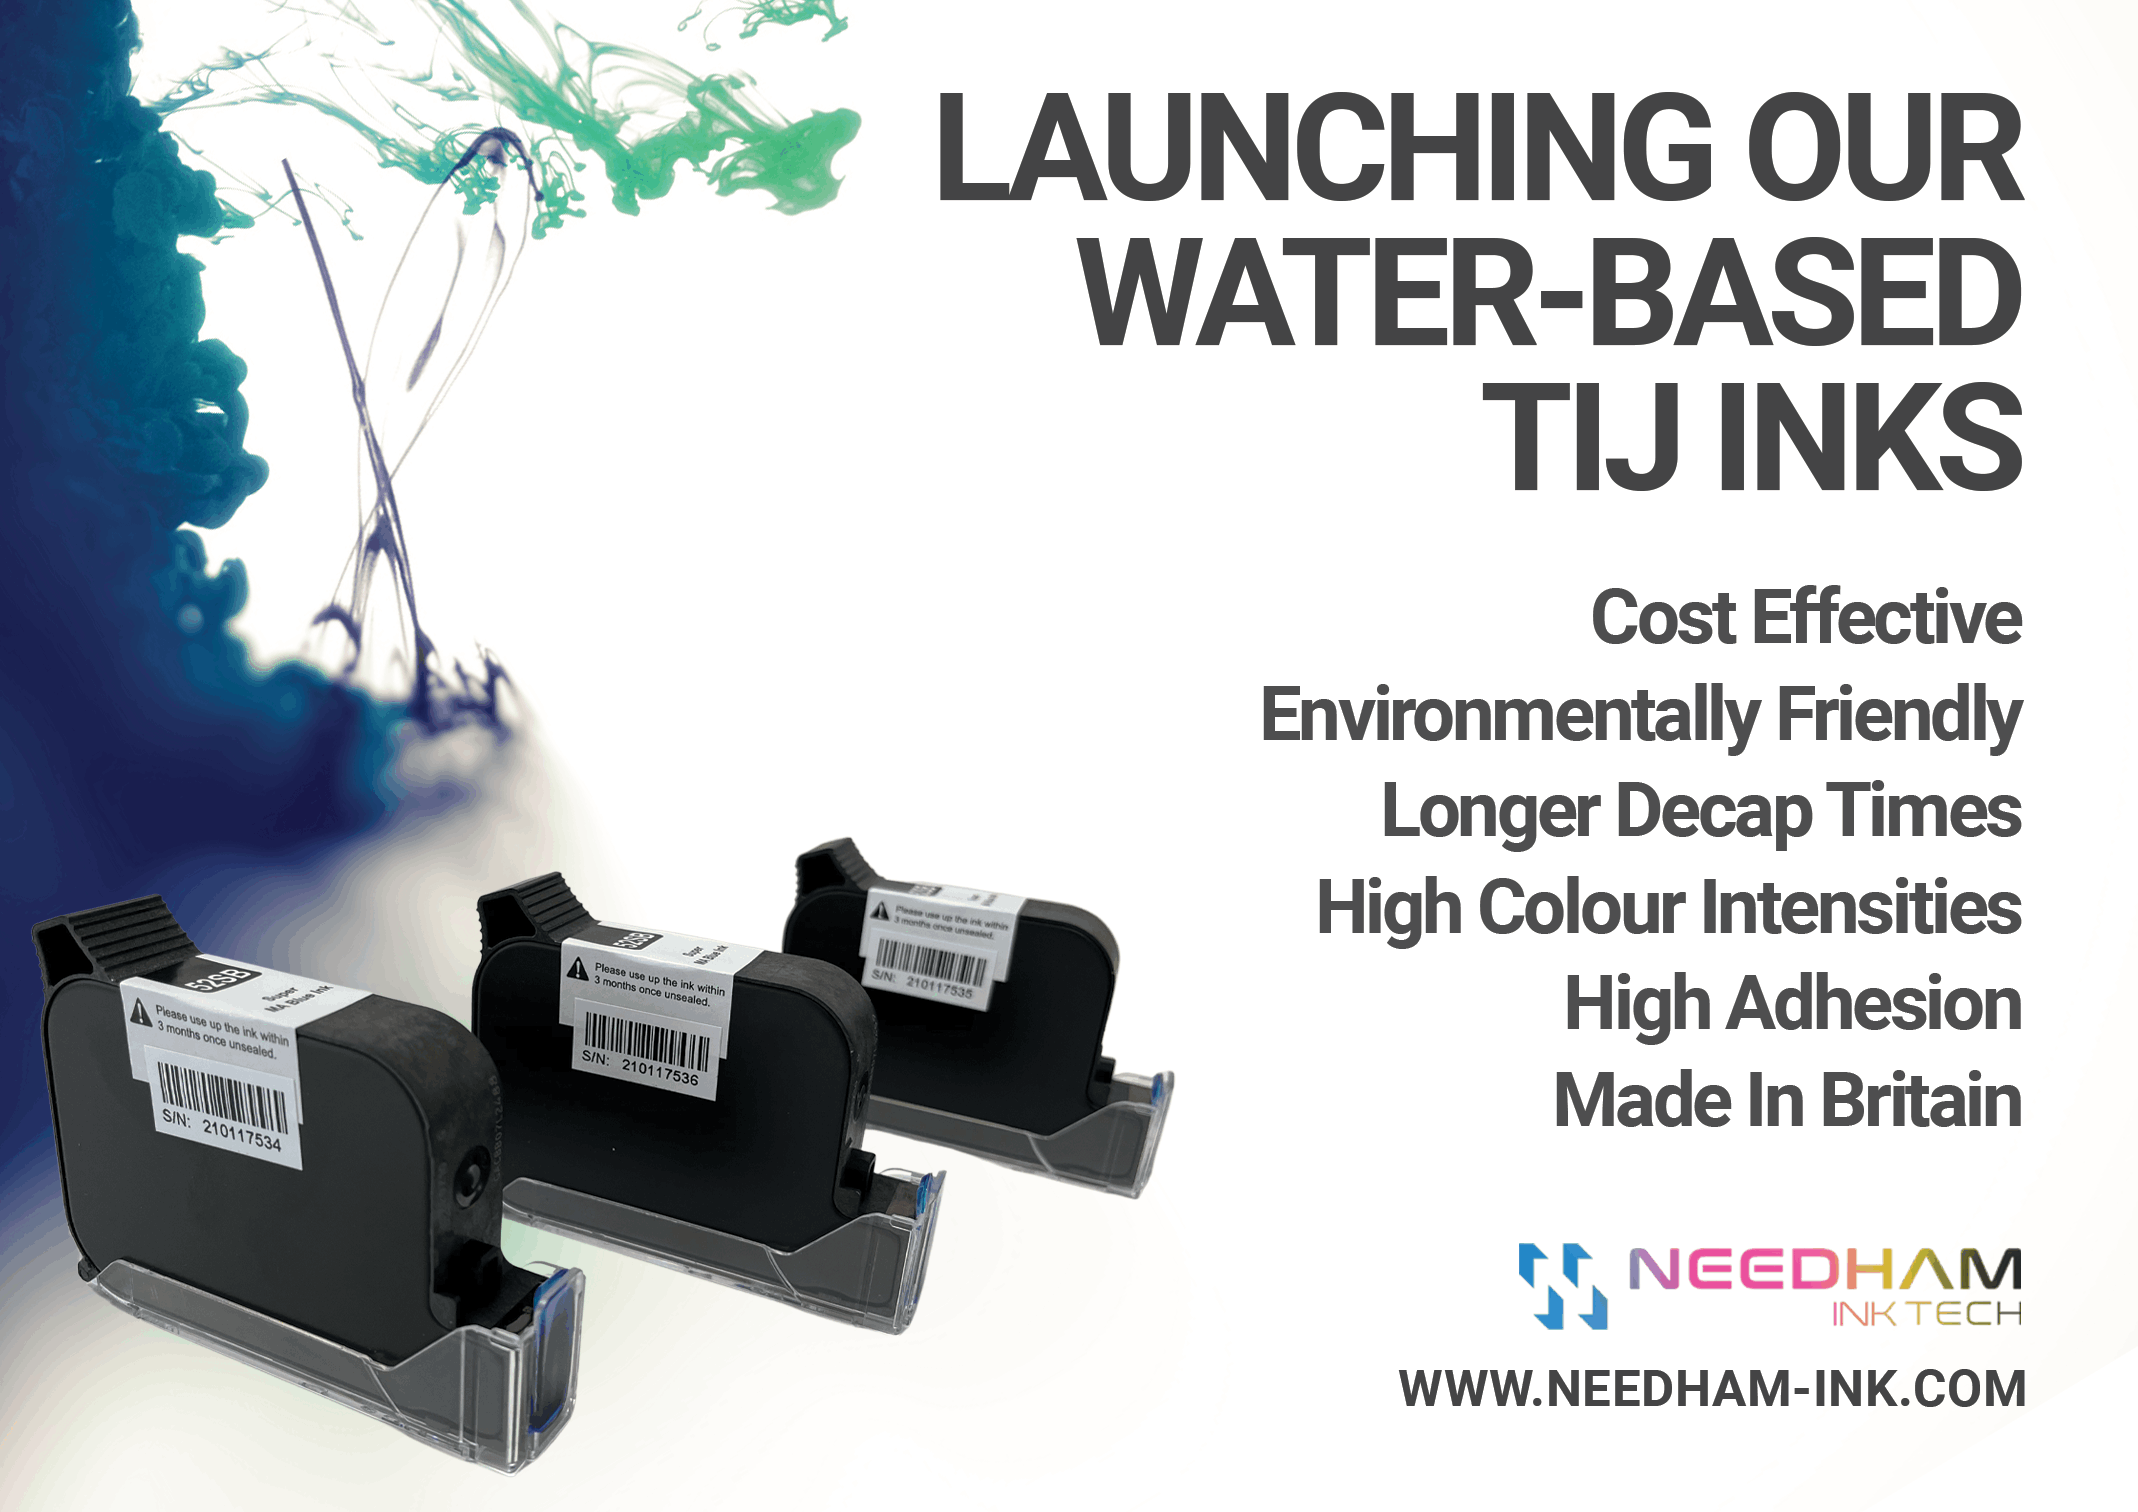 Launching Our Water-Based Thermal Inkjet Ink Range